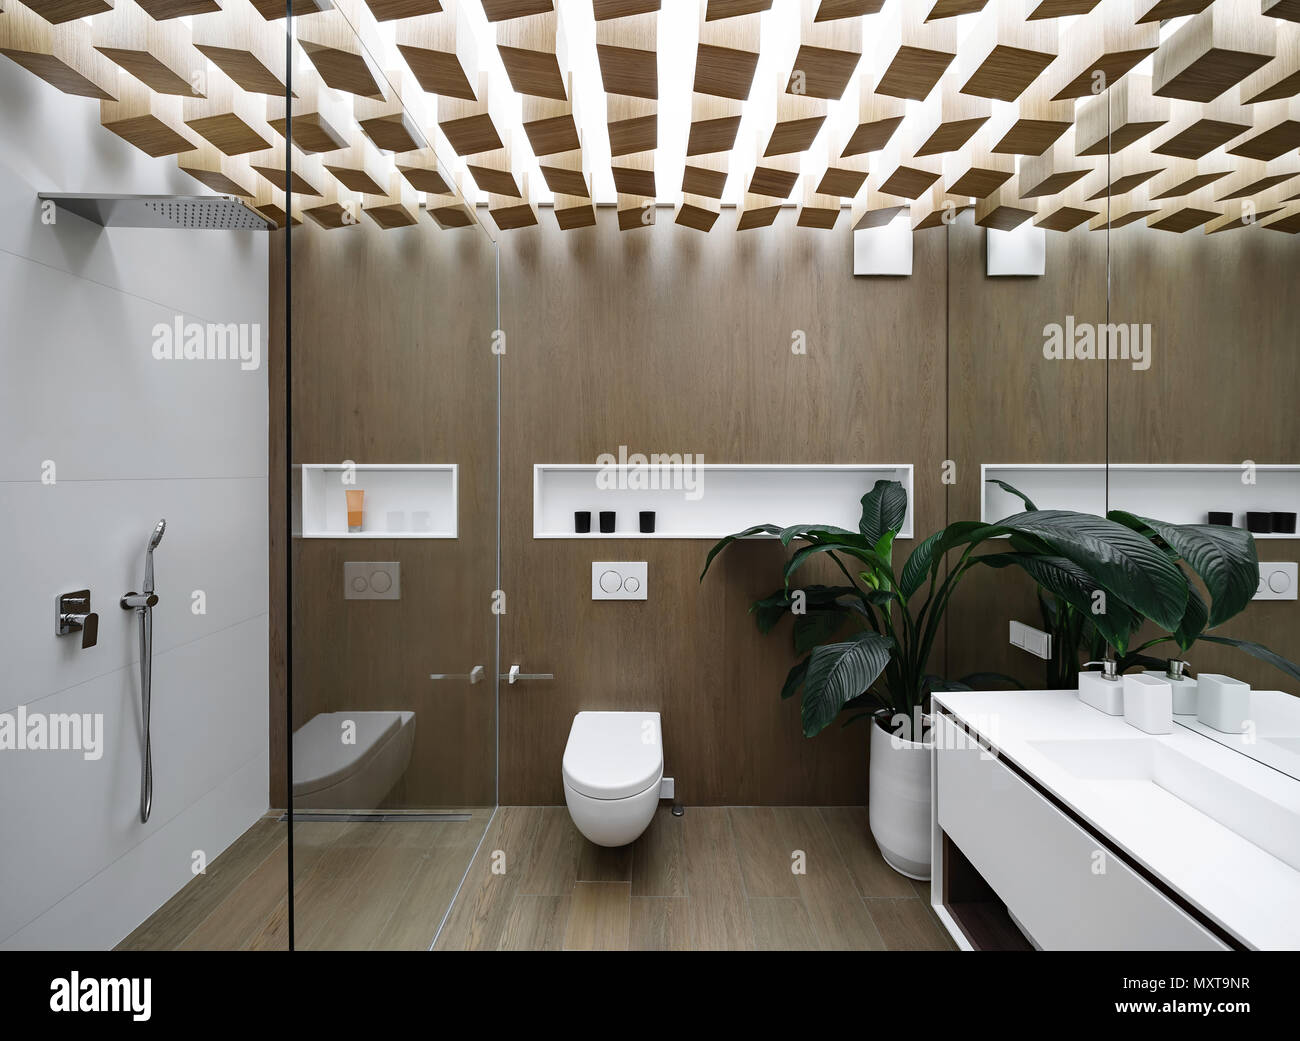 Afslut fusion Præfiks Luminous modern bathroom with design ceiling and wooden walls. There is a  glass shower cabin with light tiled wall, white toilet, sink with a mirror  Stock Photo - Alamy